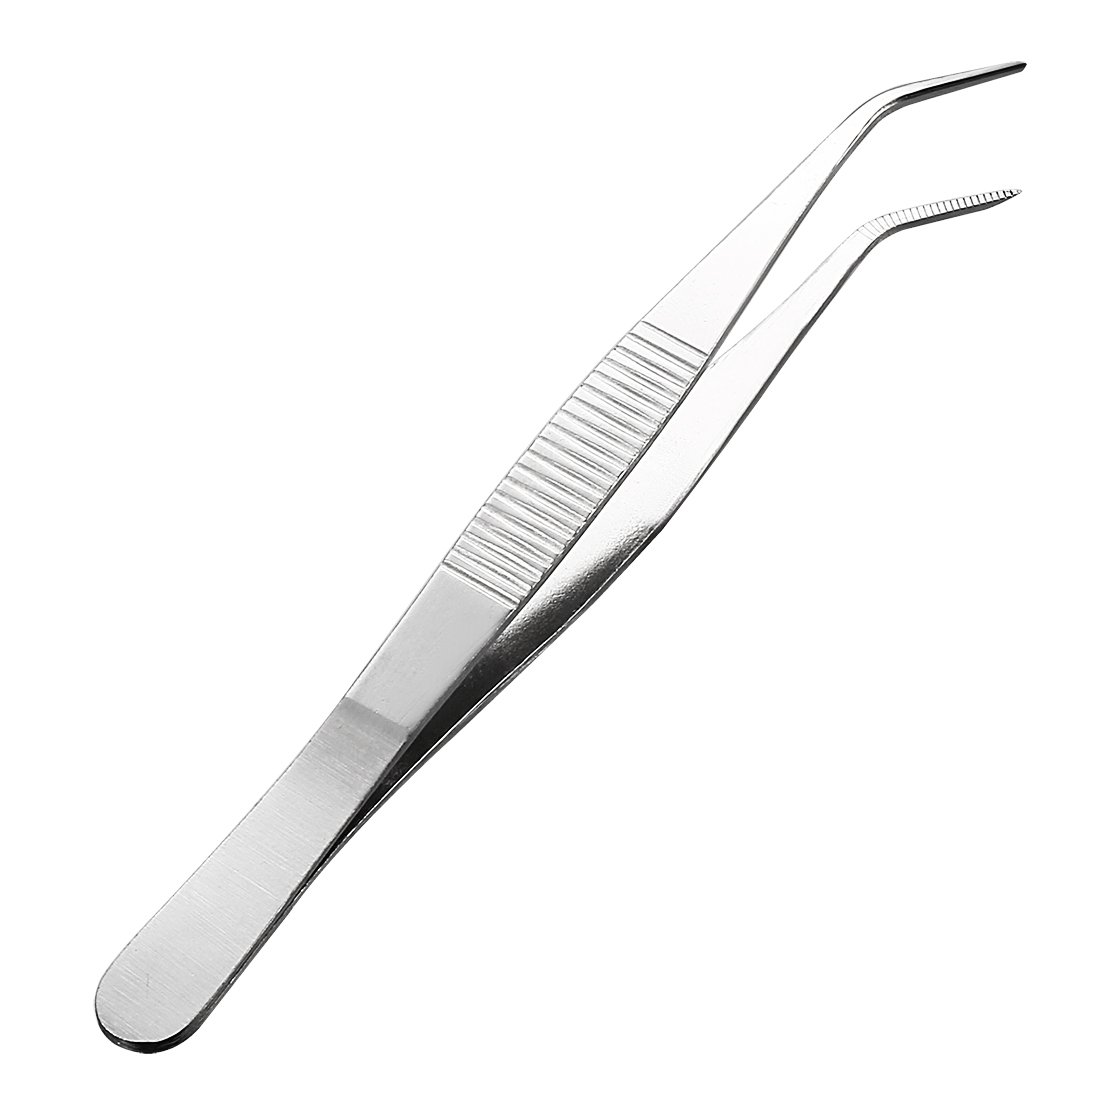 uxcell 2 Pcs 5.5-Inch Stainless Steel Tweezers with Curved Pointed Serrated Tip